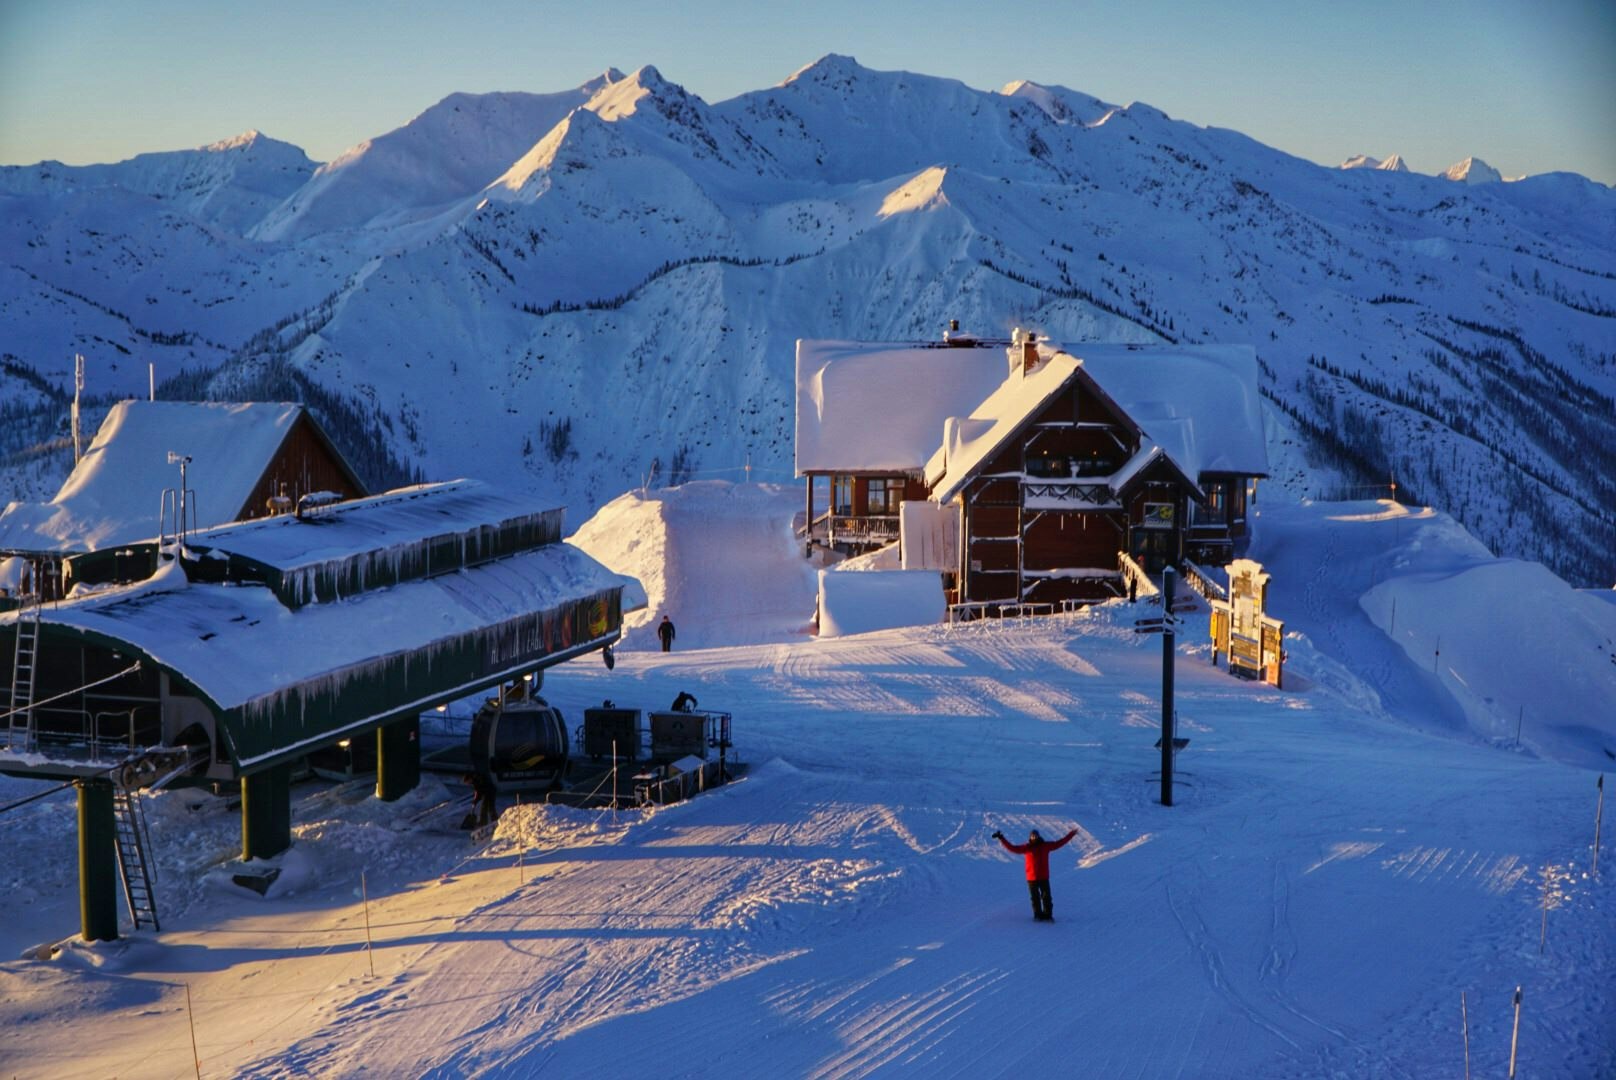 A person in a red ski jacket and black pants is joyfully holding up their arms; they're standing at the top of a piste, beside a ski-lift station. Behind them is a mountain chalet and, beyond that, are mountains covered in snow.